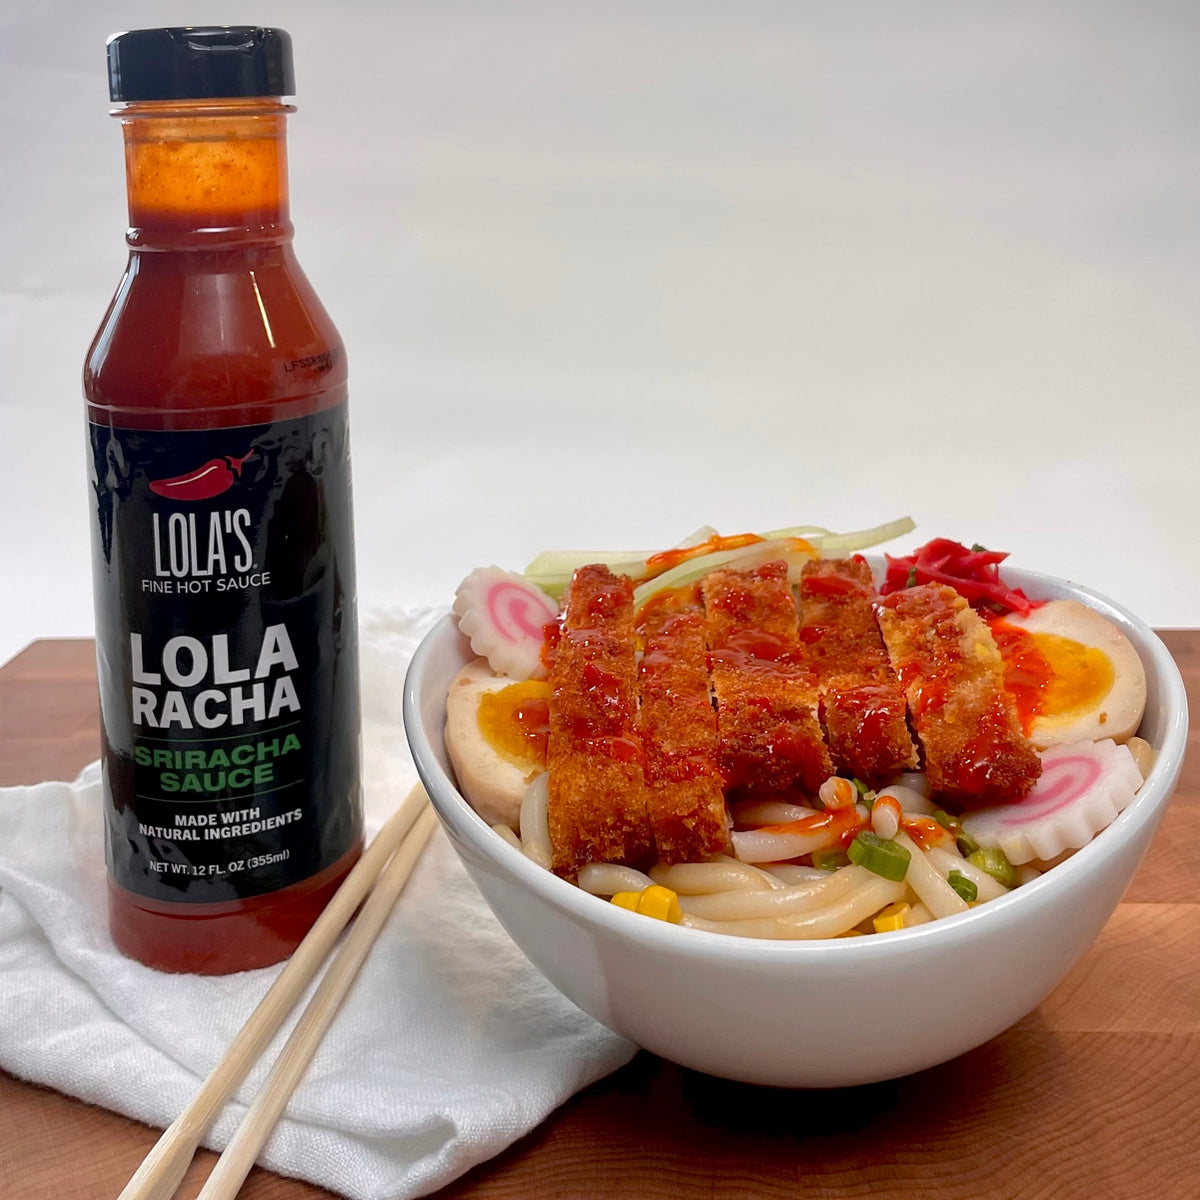 A bowl of food with Lola's Sriracha sauce and chopsticks, perfect for adding a spicy kick to any dish.